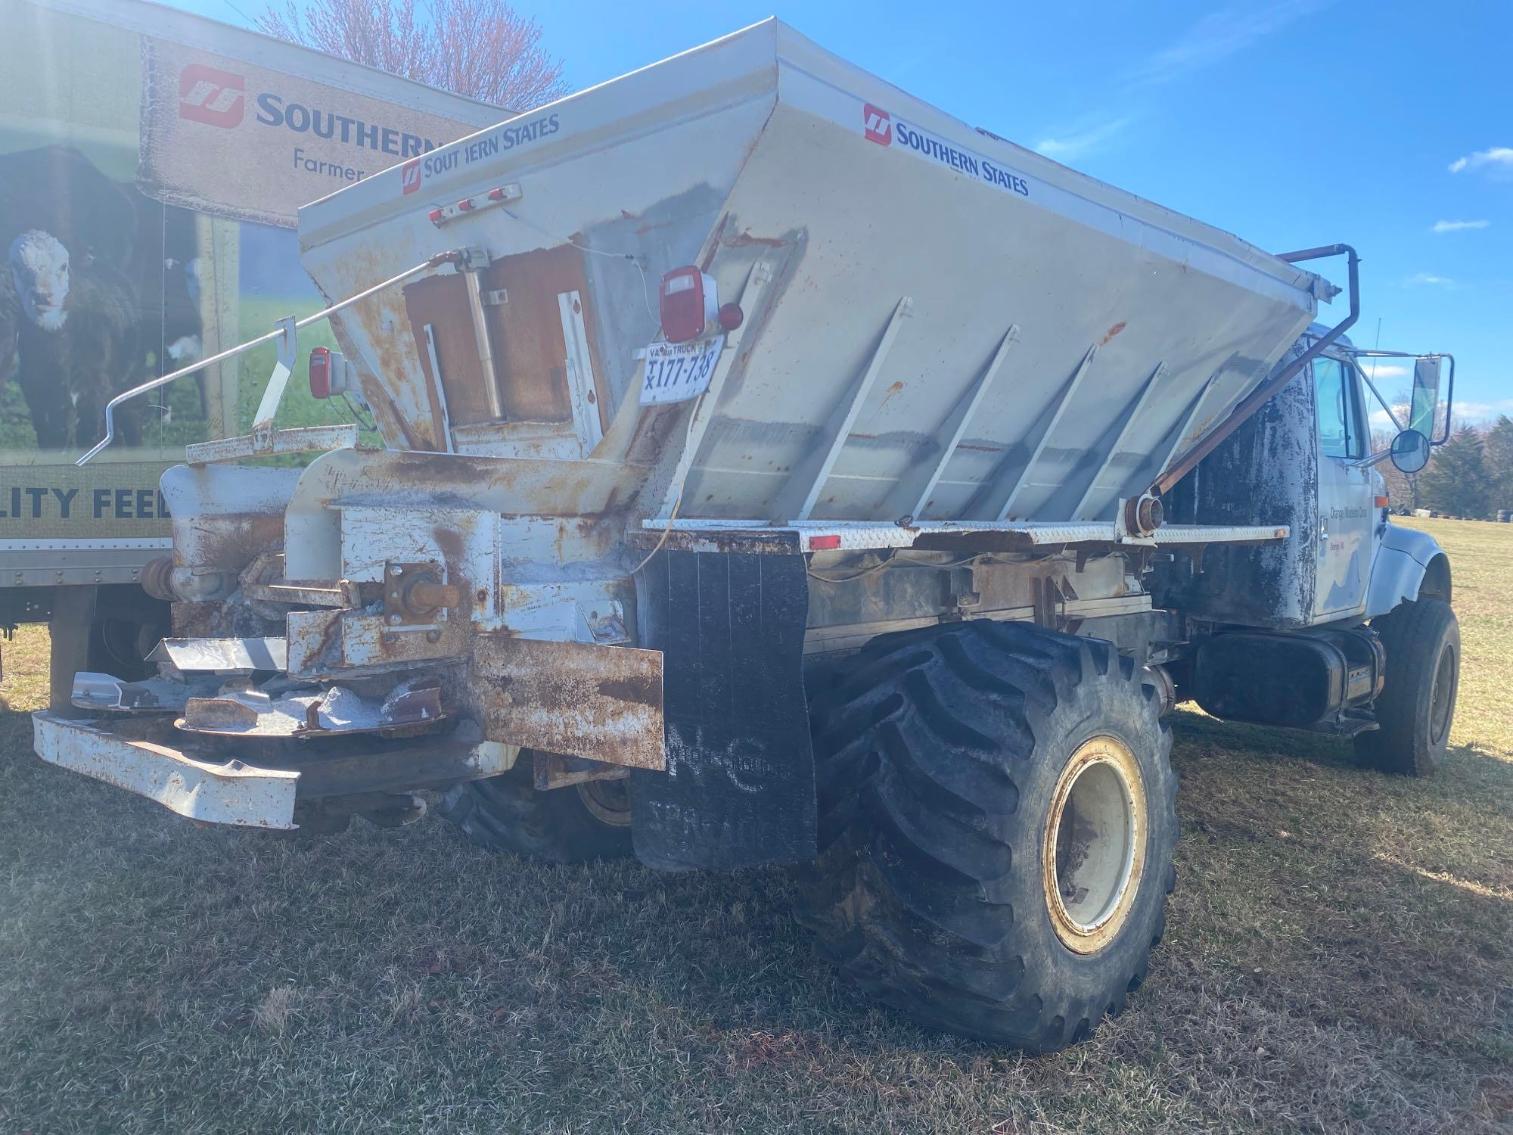 Image for 1996 International 4900, W Spreader Box and Tarp Cover VIN #: 1HTSDAAR6TH351827 Mileage: 133,149, Bad Rear Differential per Seller